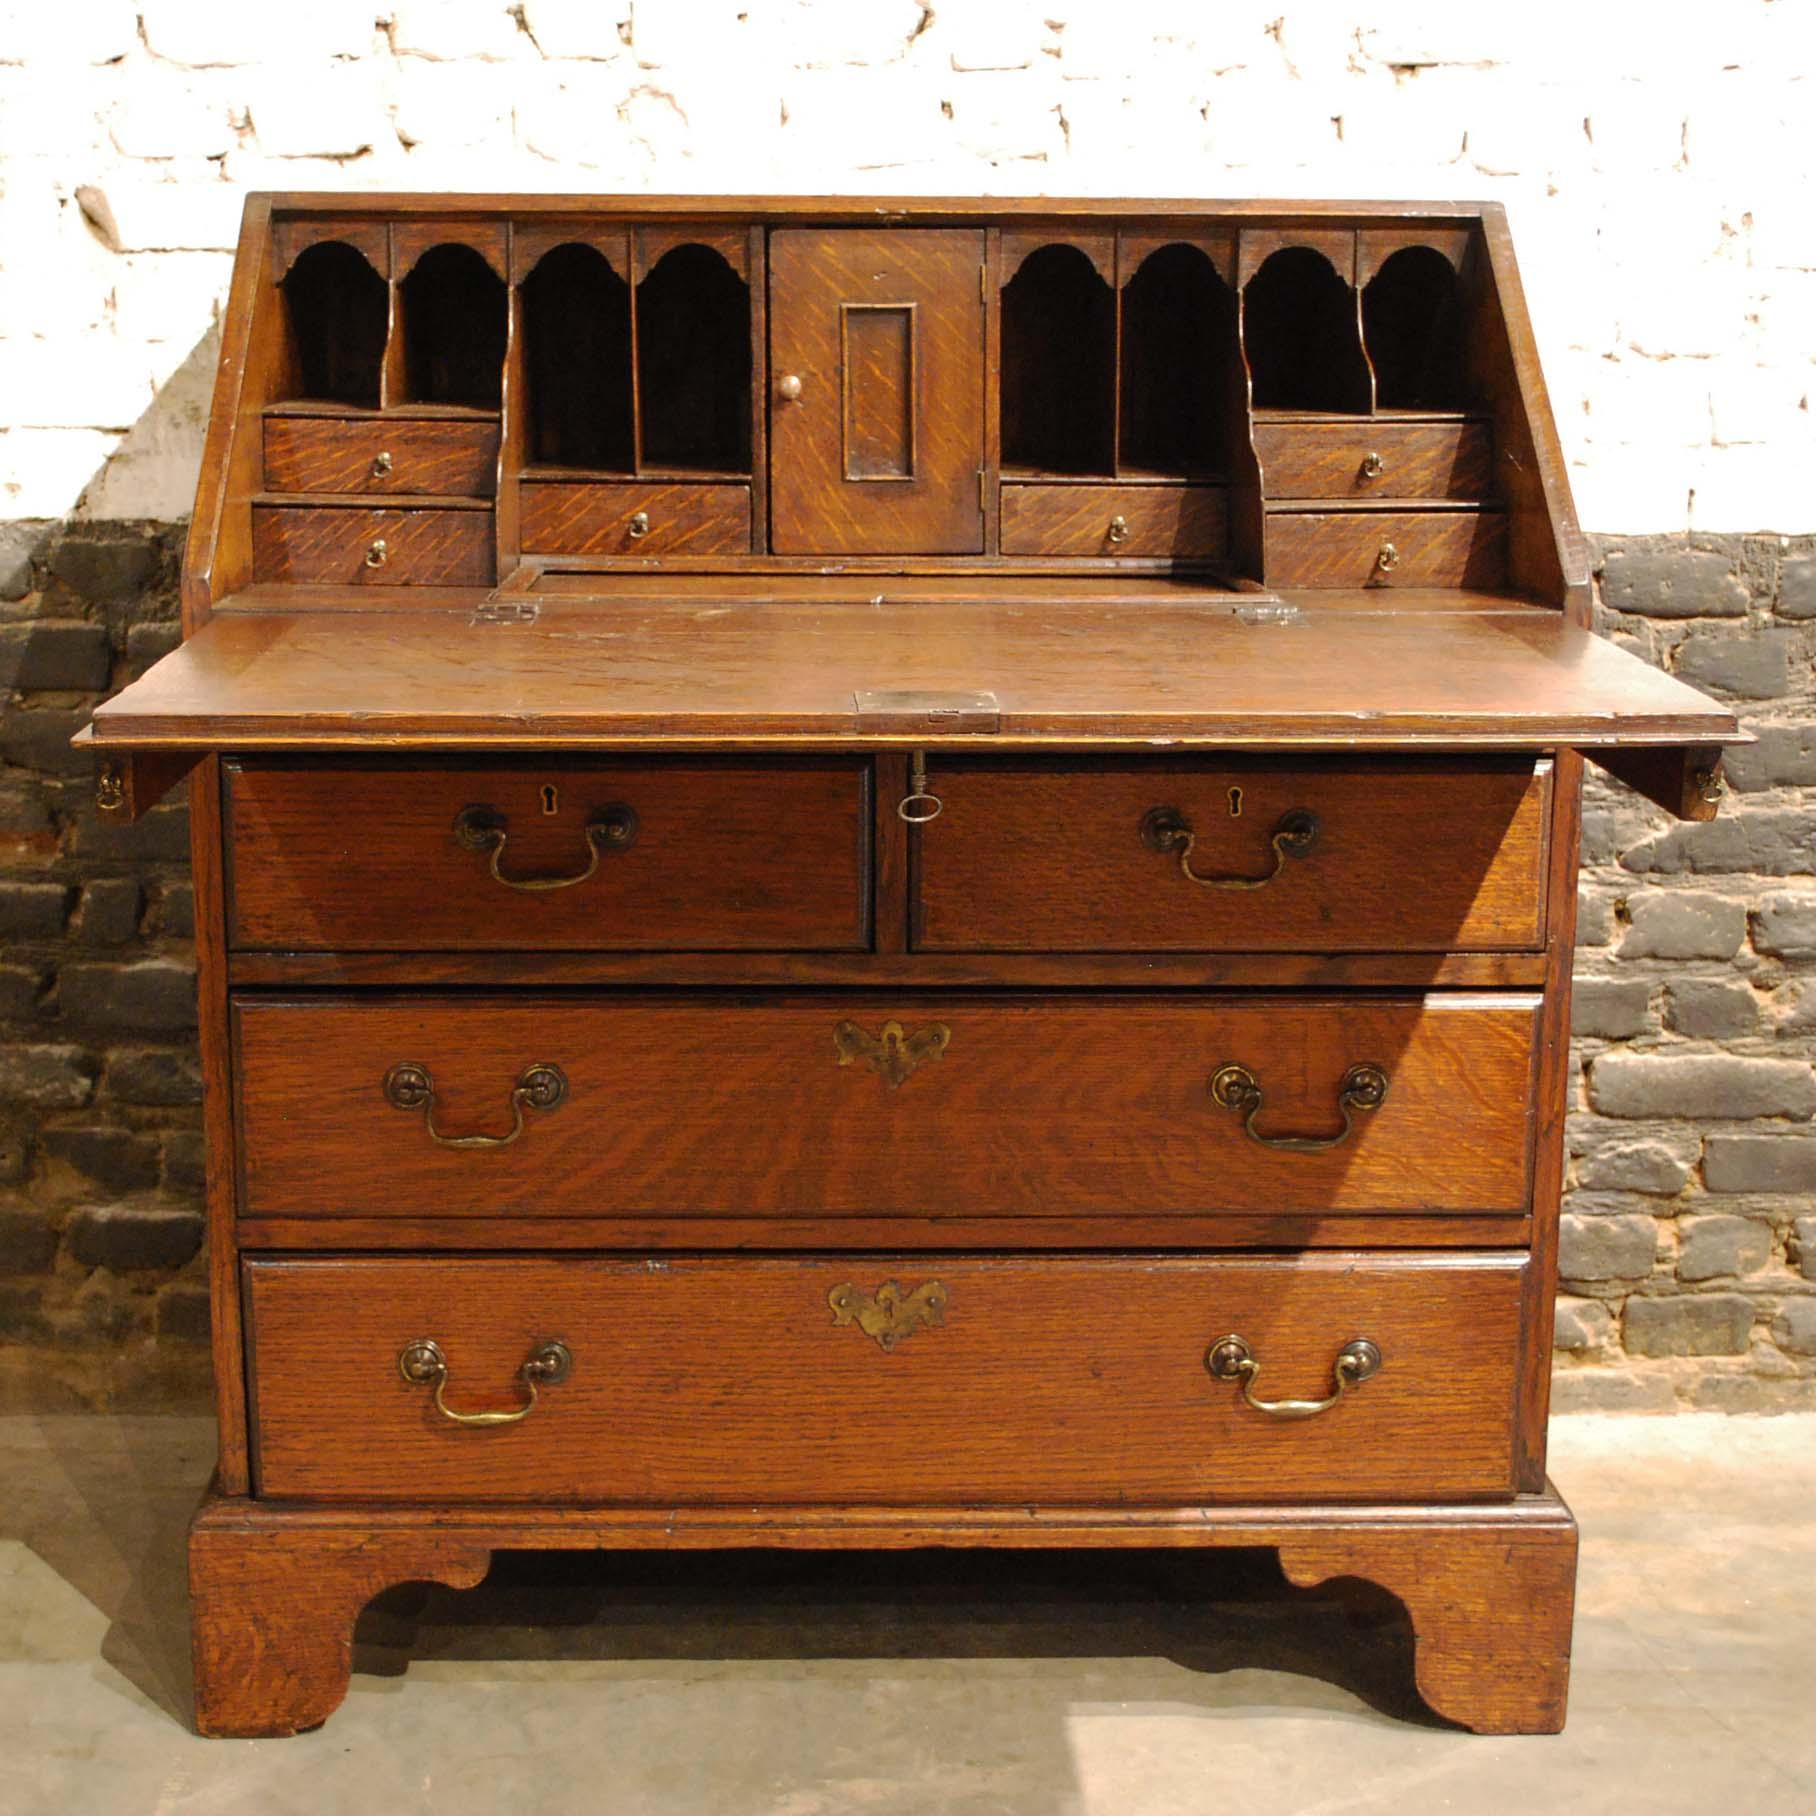 This classic slant front desk or bureau was made in England in the early 19th century.
It was made in the finest quality watered European oak. The secretary is elevated on bracket feet. It features four drawers fitted with the original brass